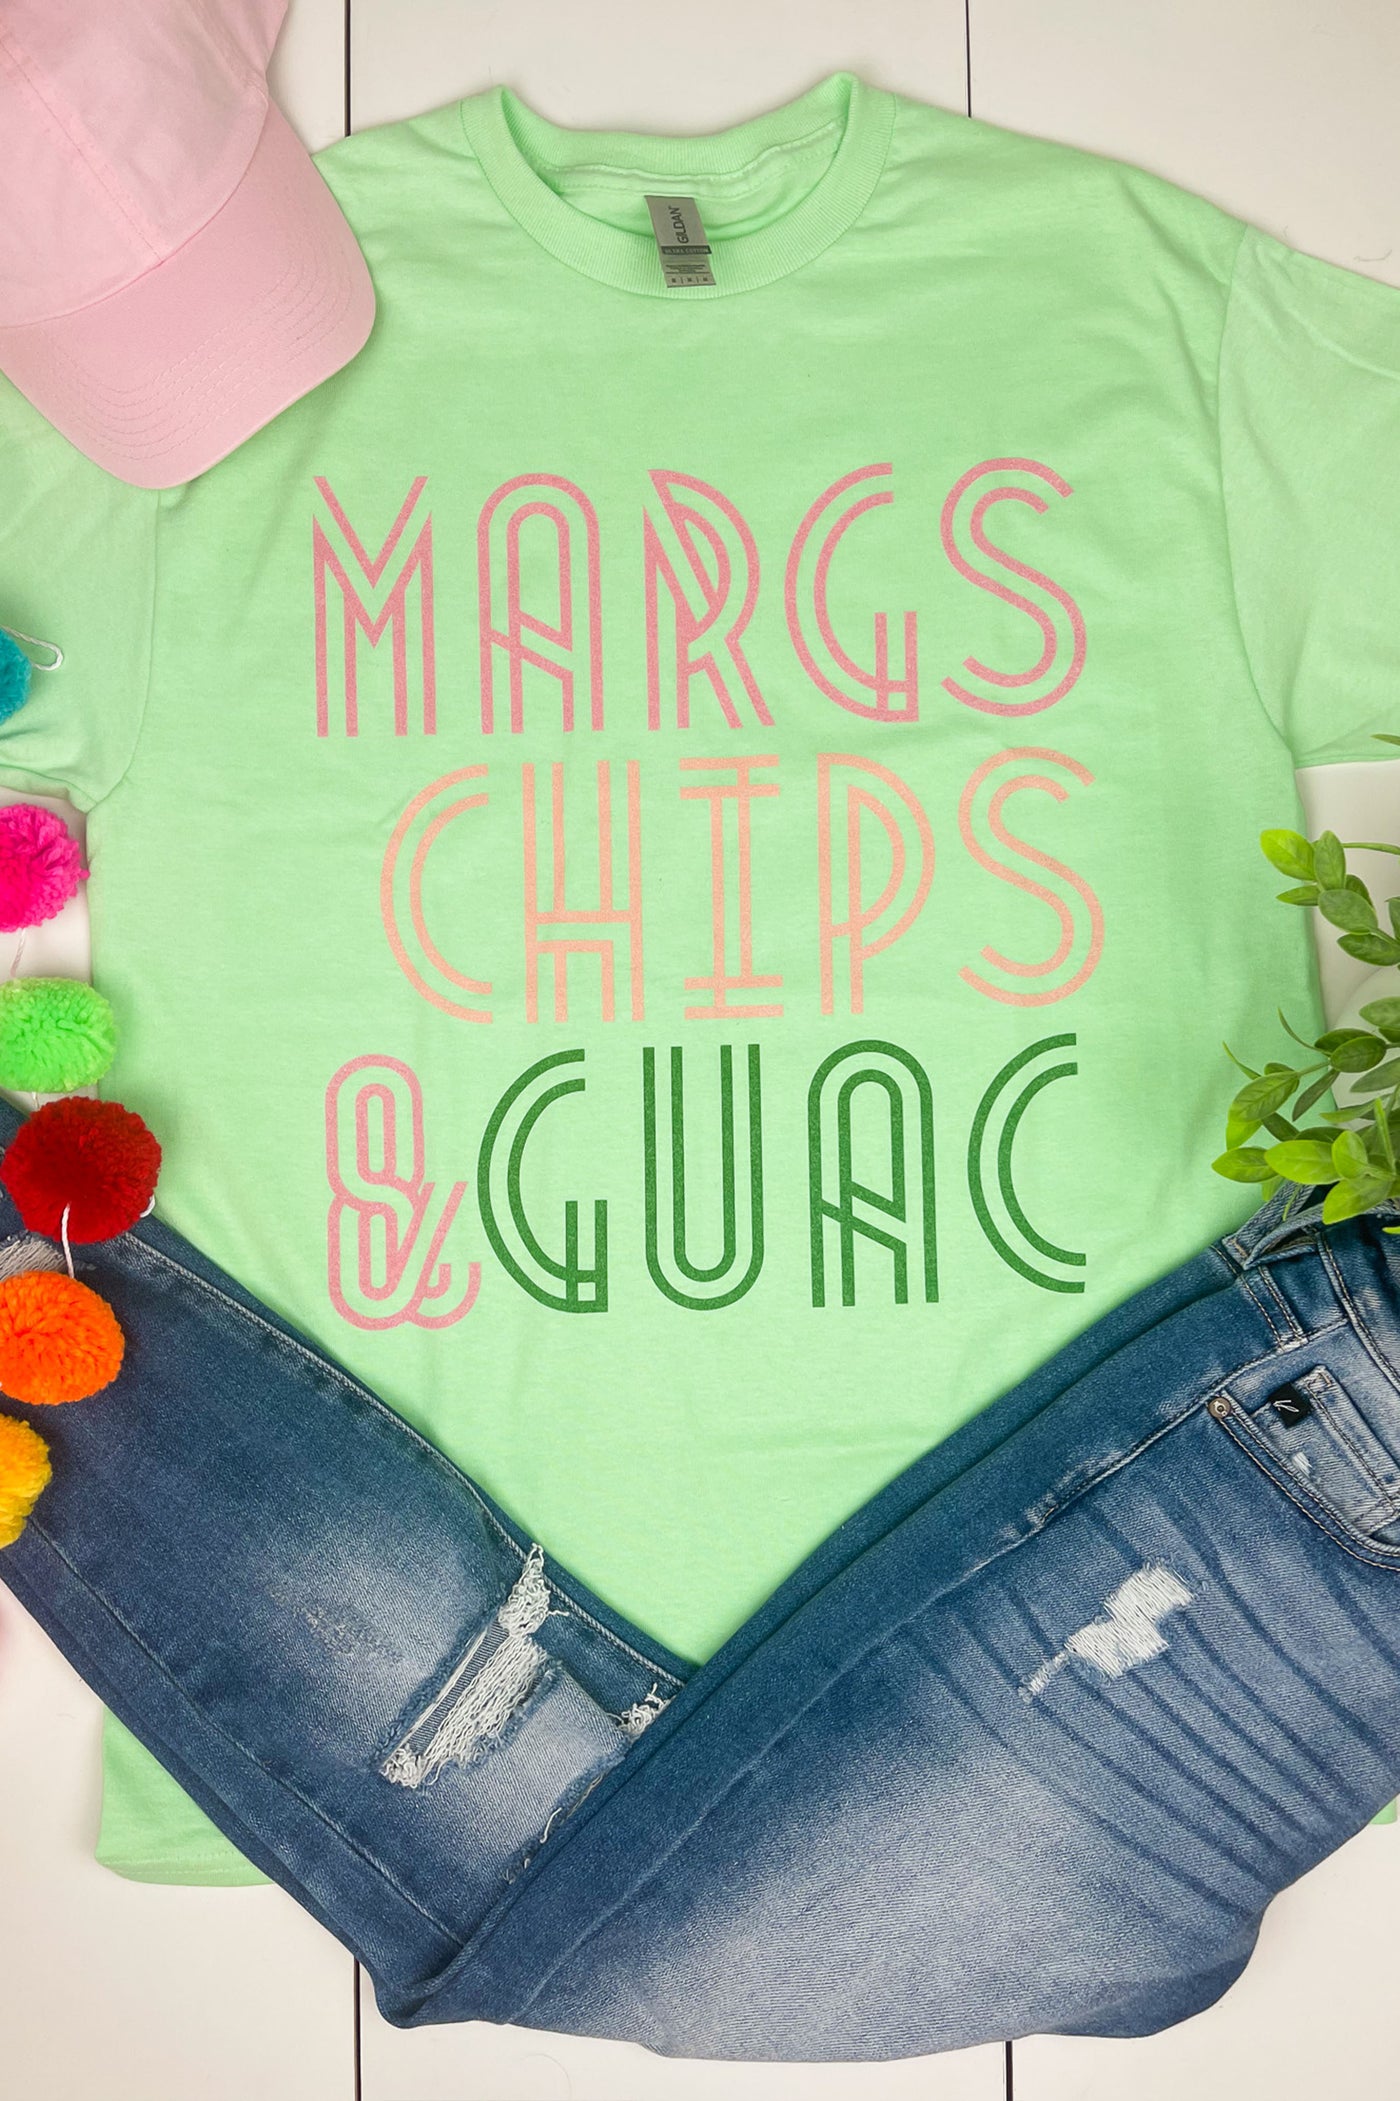 MARGS CHIPS & GUAC